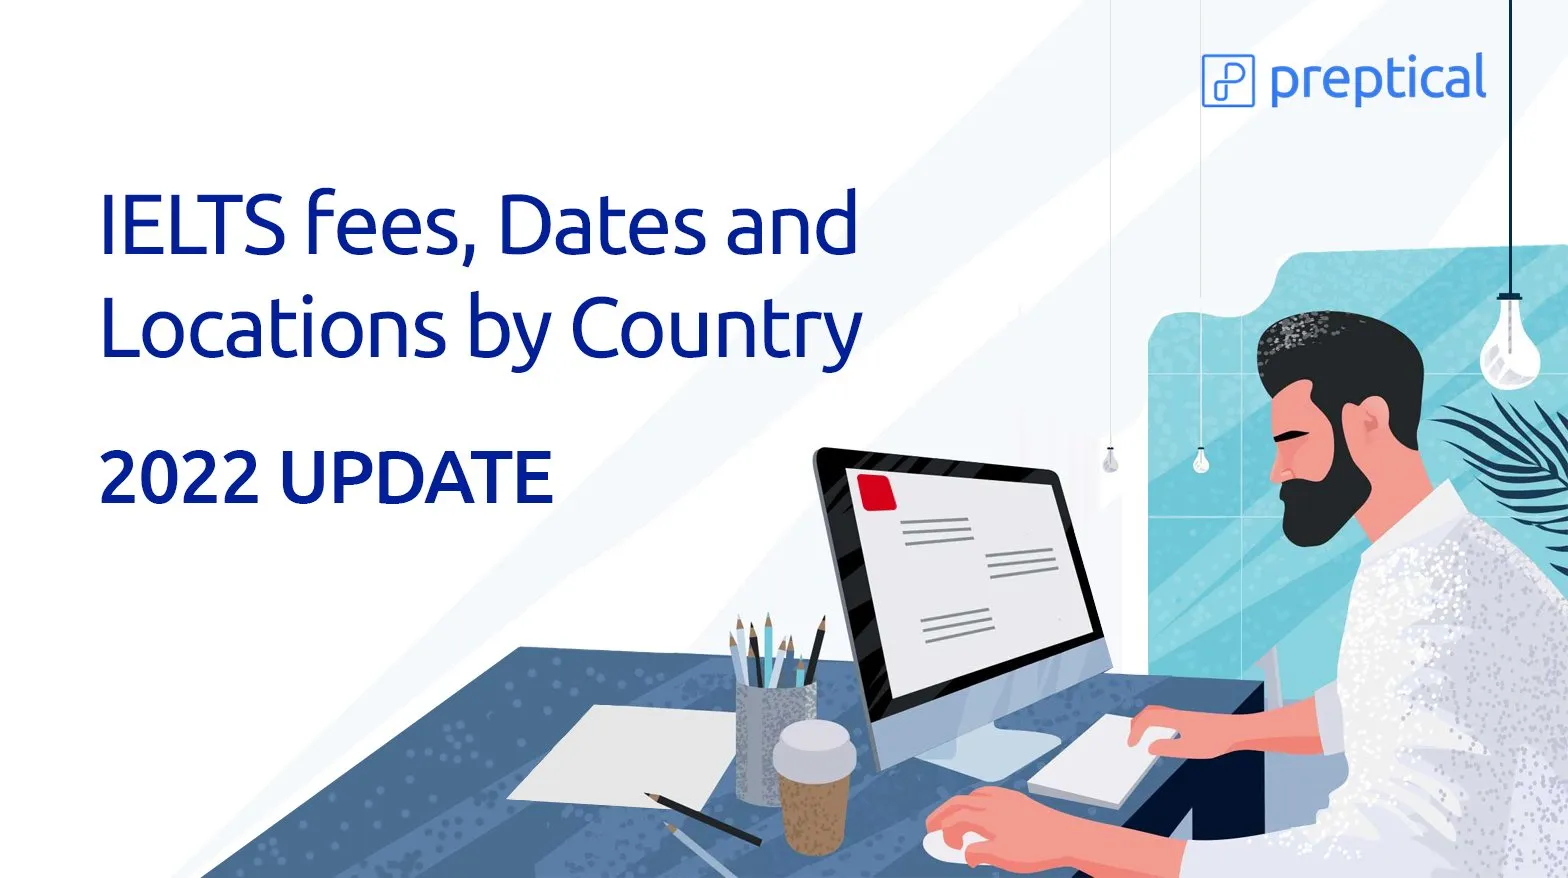 IELTS Fees, Dates and Locations by Country, 2022 Update